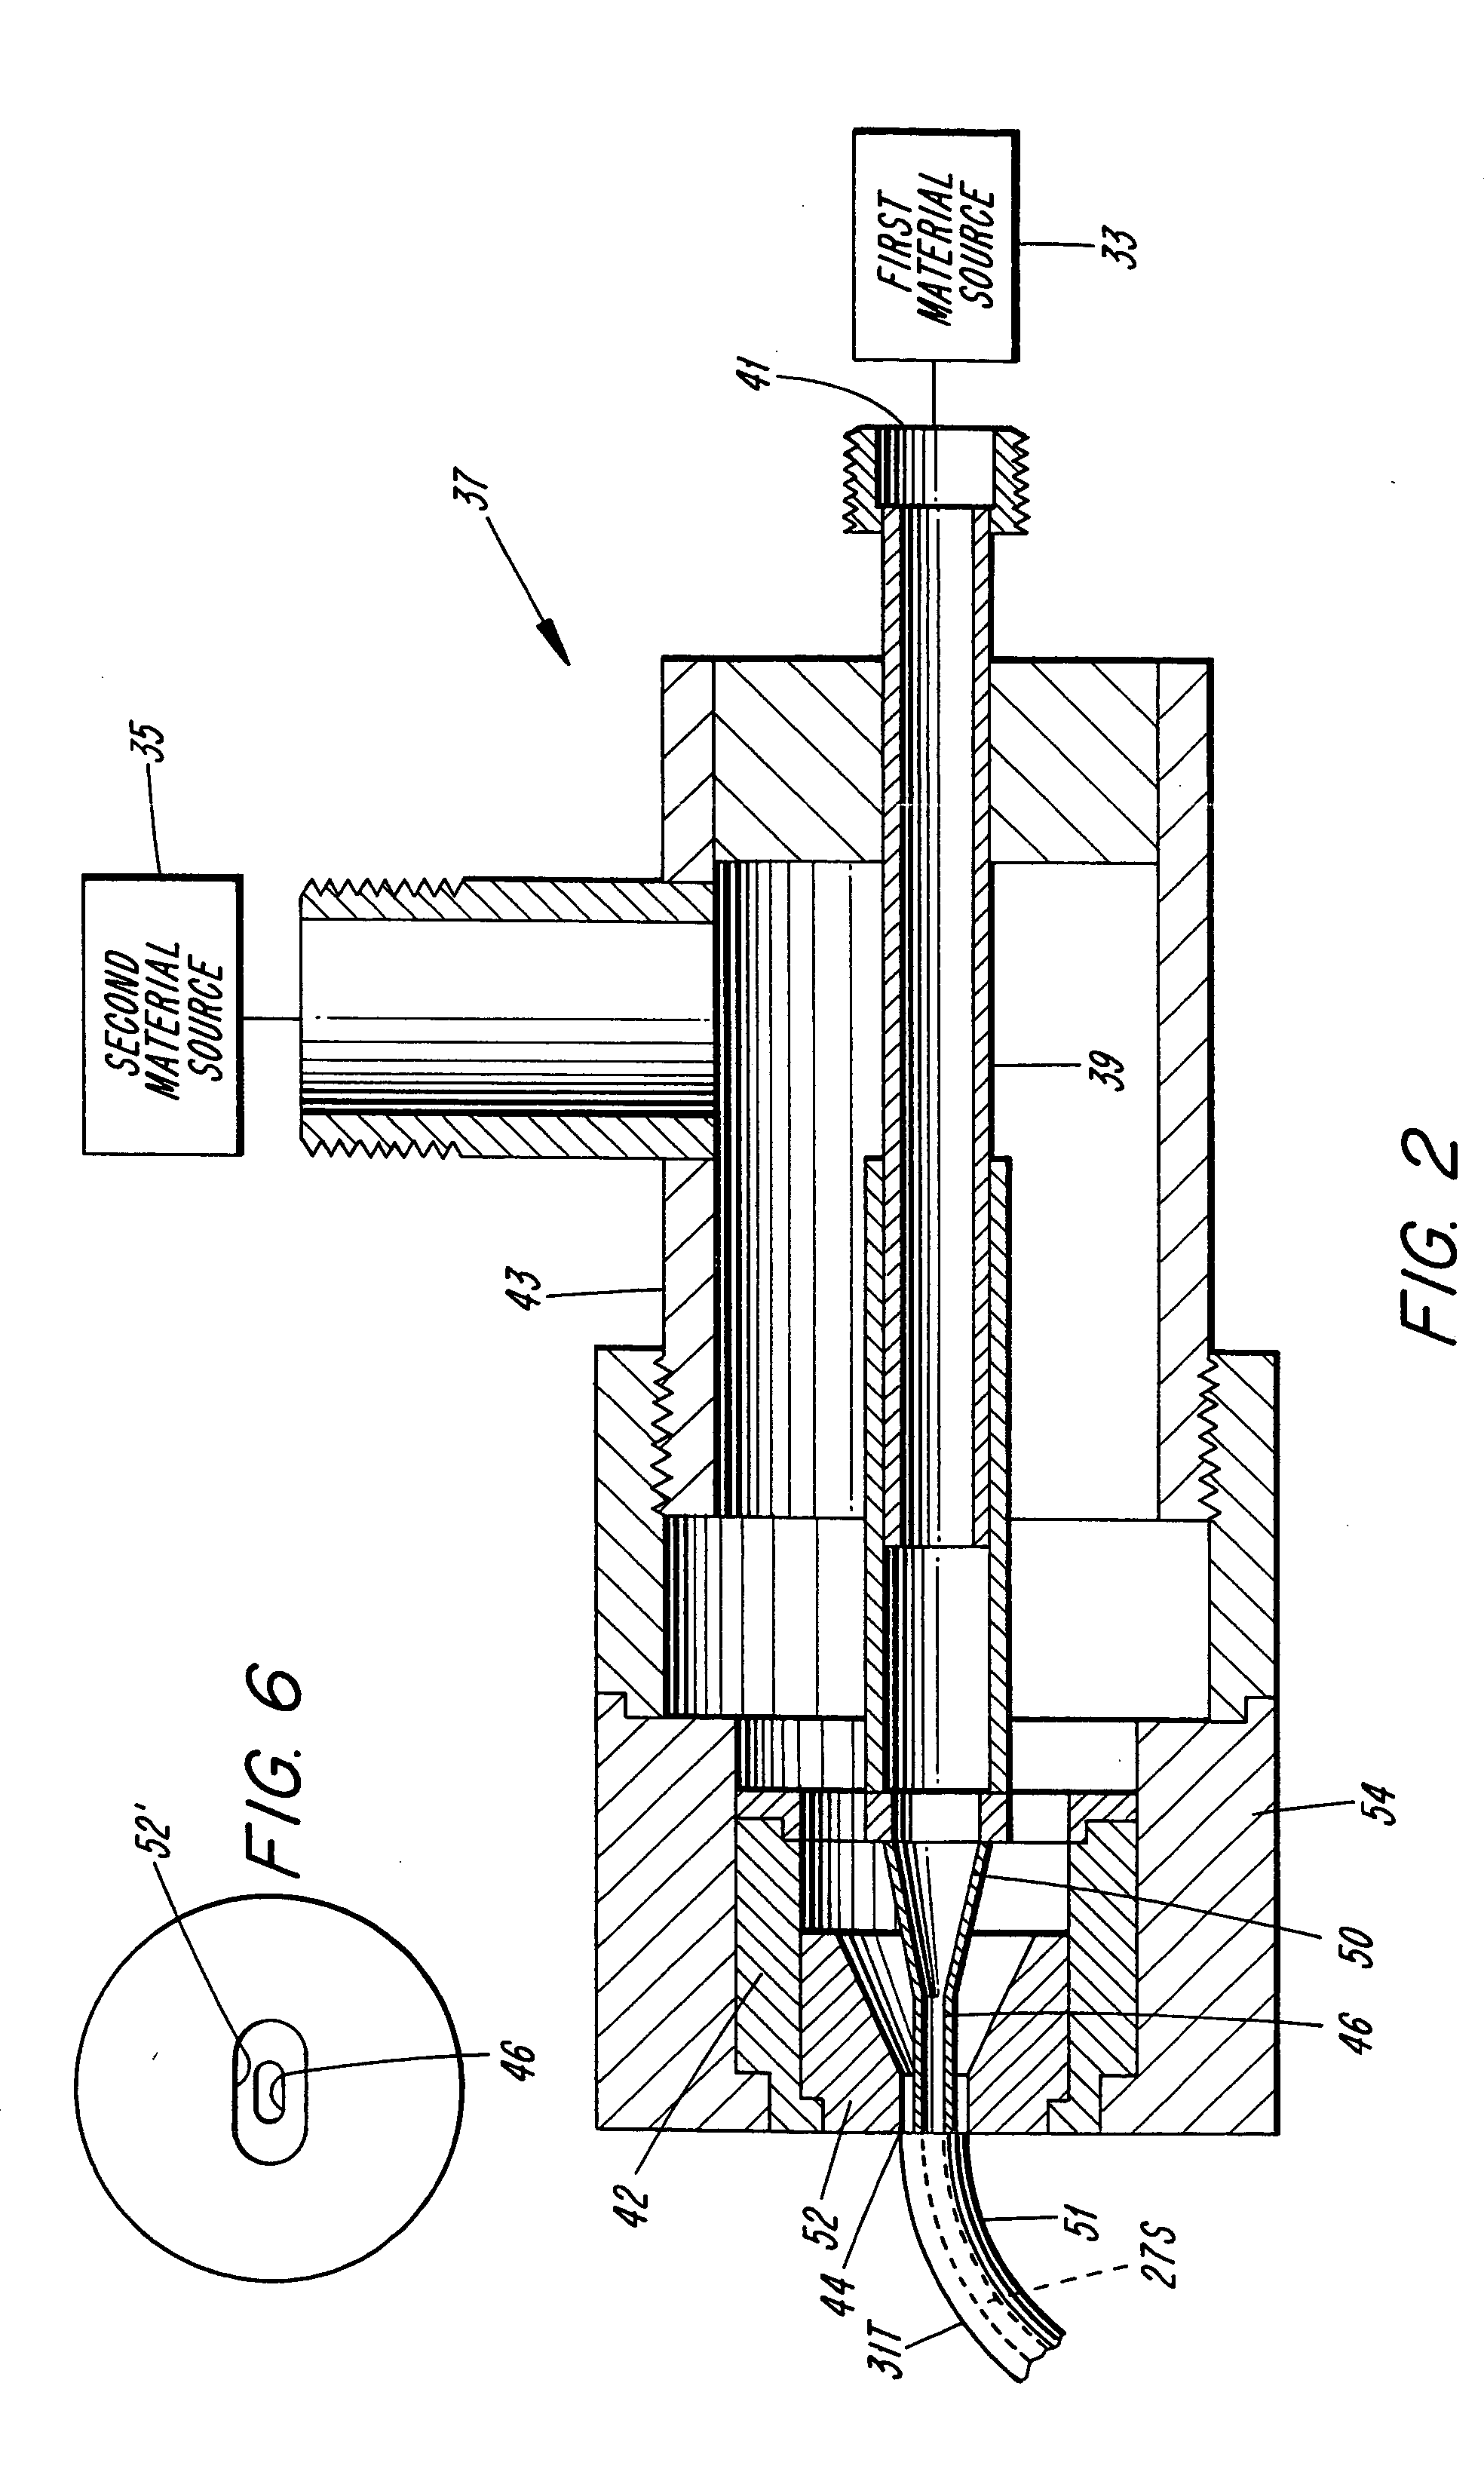 Filled edible product, and system and method for production of a filled edible product